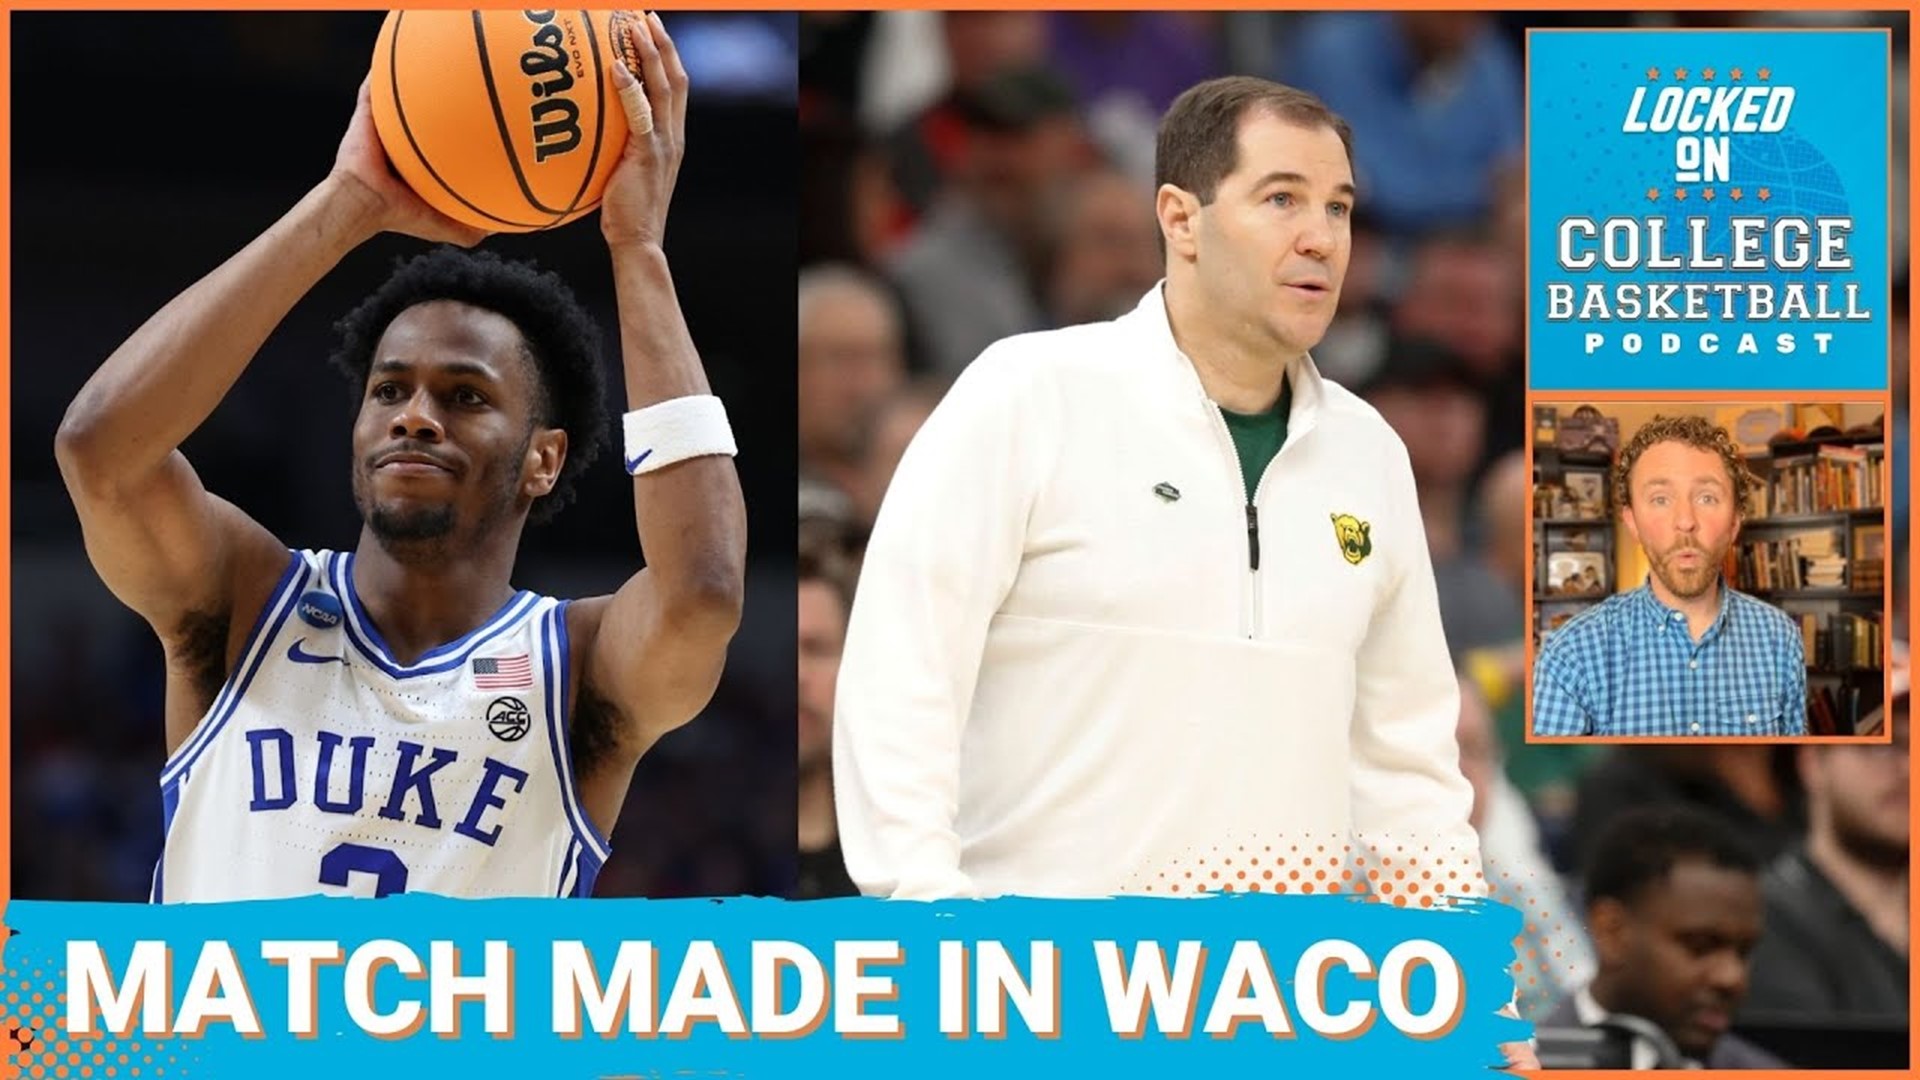 Baylor lands Jeremy Roach in the transfer portal and it should be a great get for Scott Drew, who decided to stay in Waco rather than taking the Kentucky job.